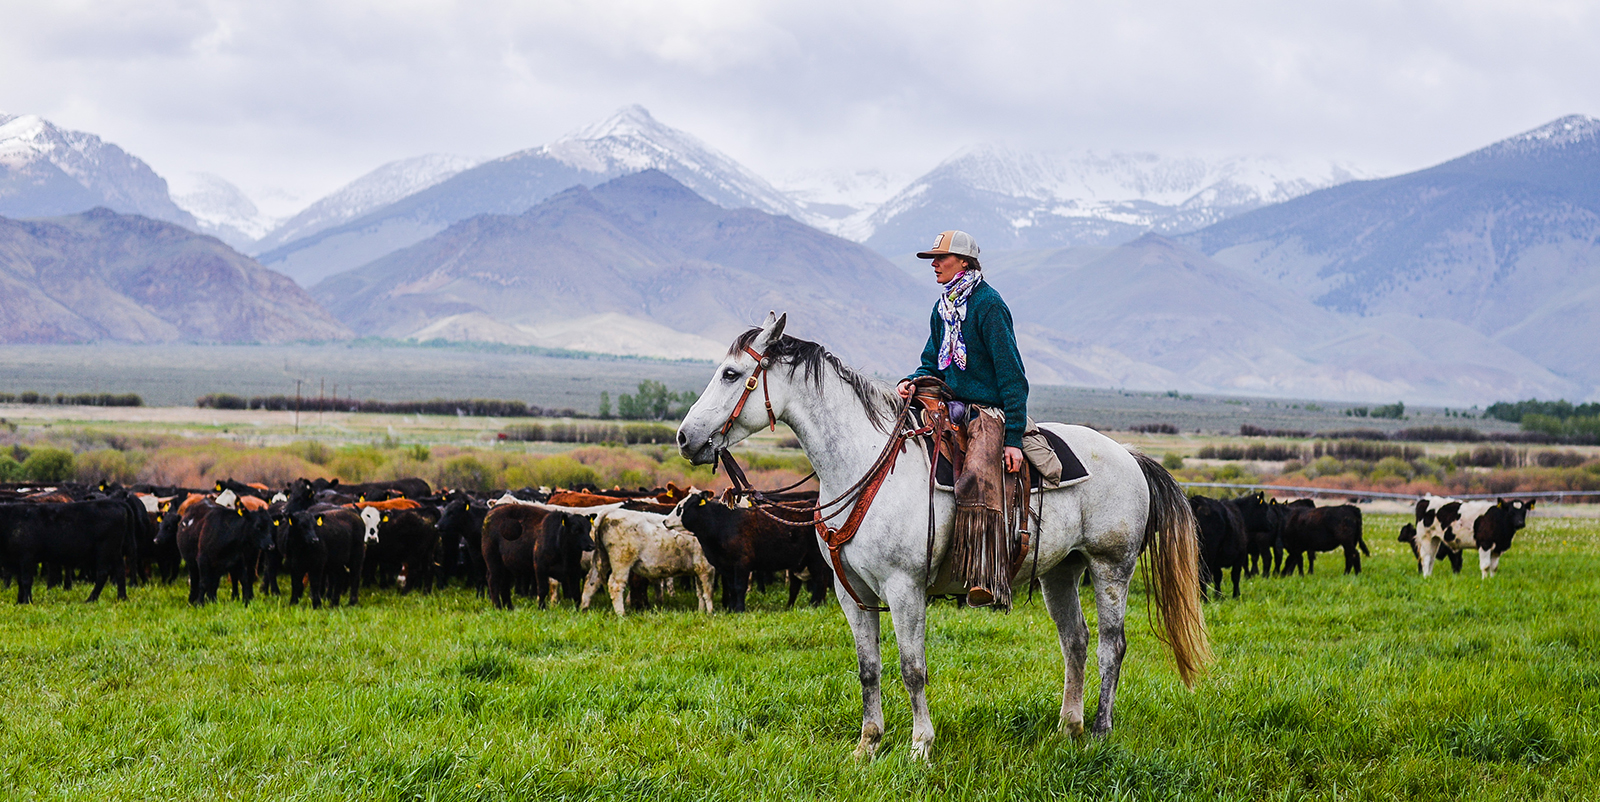 A woman on horseback in front of mountains and cattle